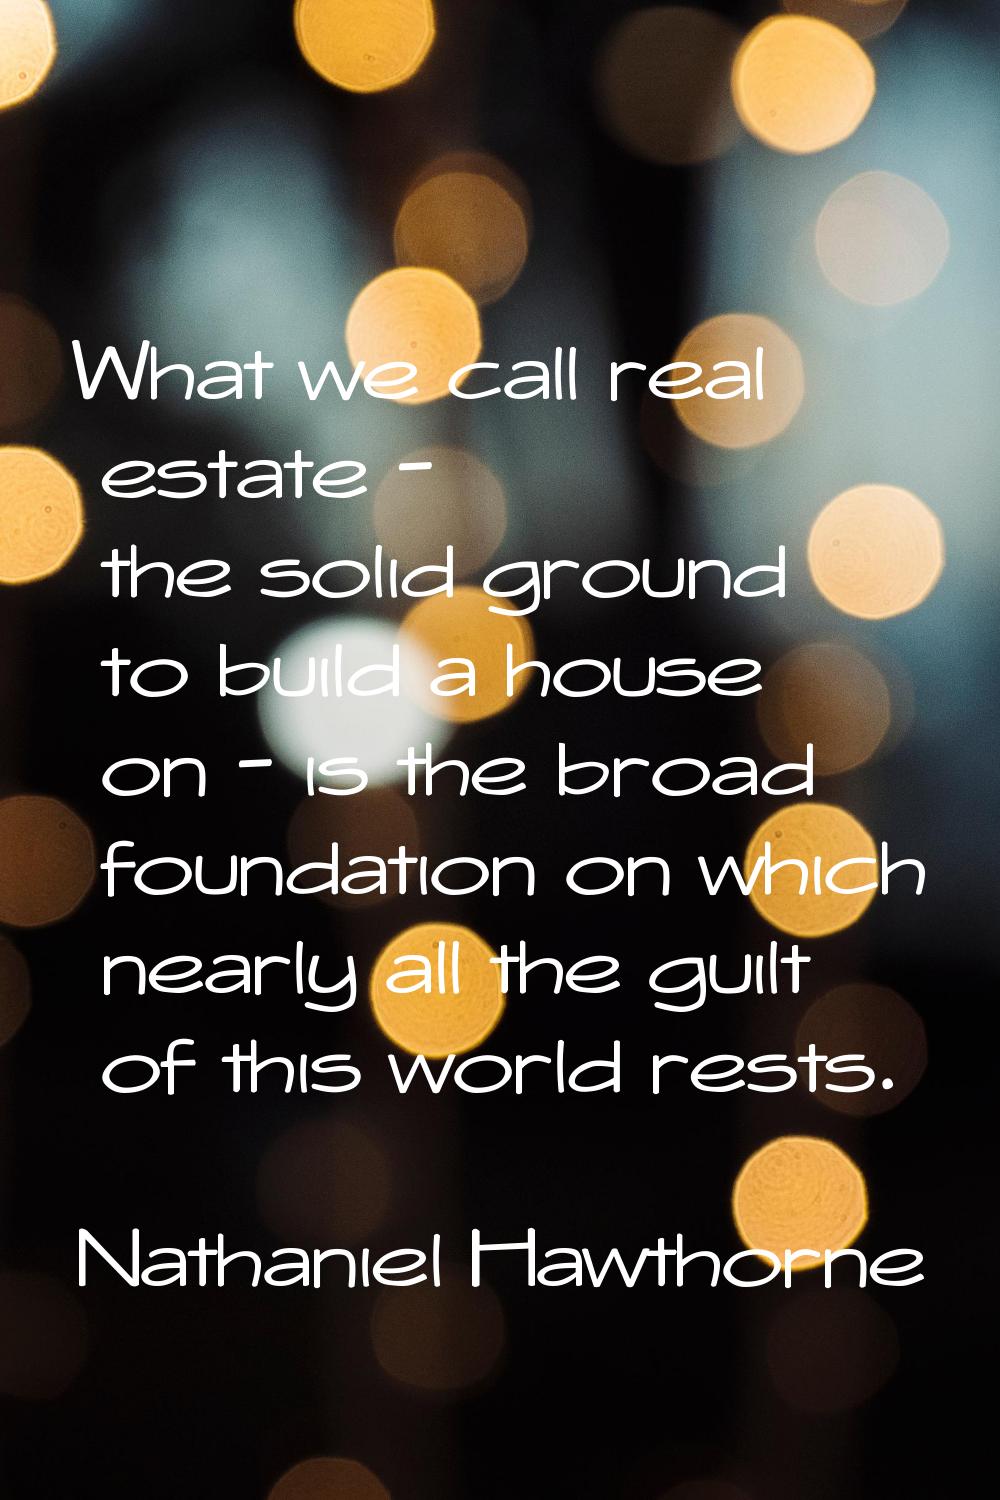 What we call real estate - the solid ground to build a house on - is the broad foundation on which 